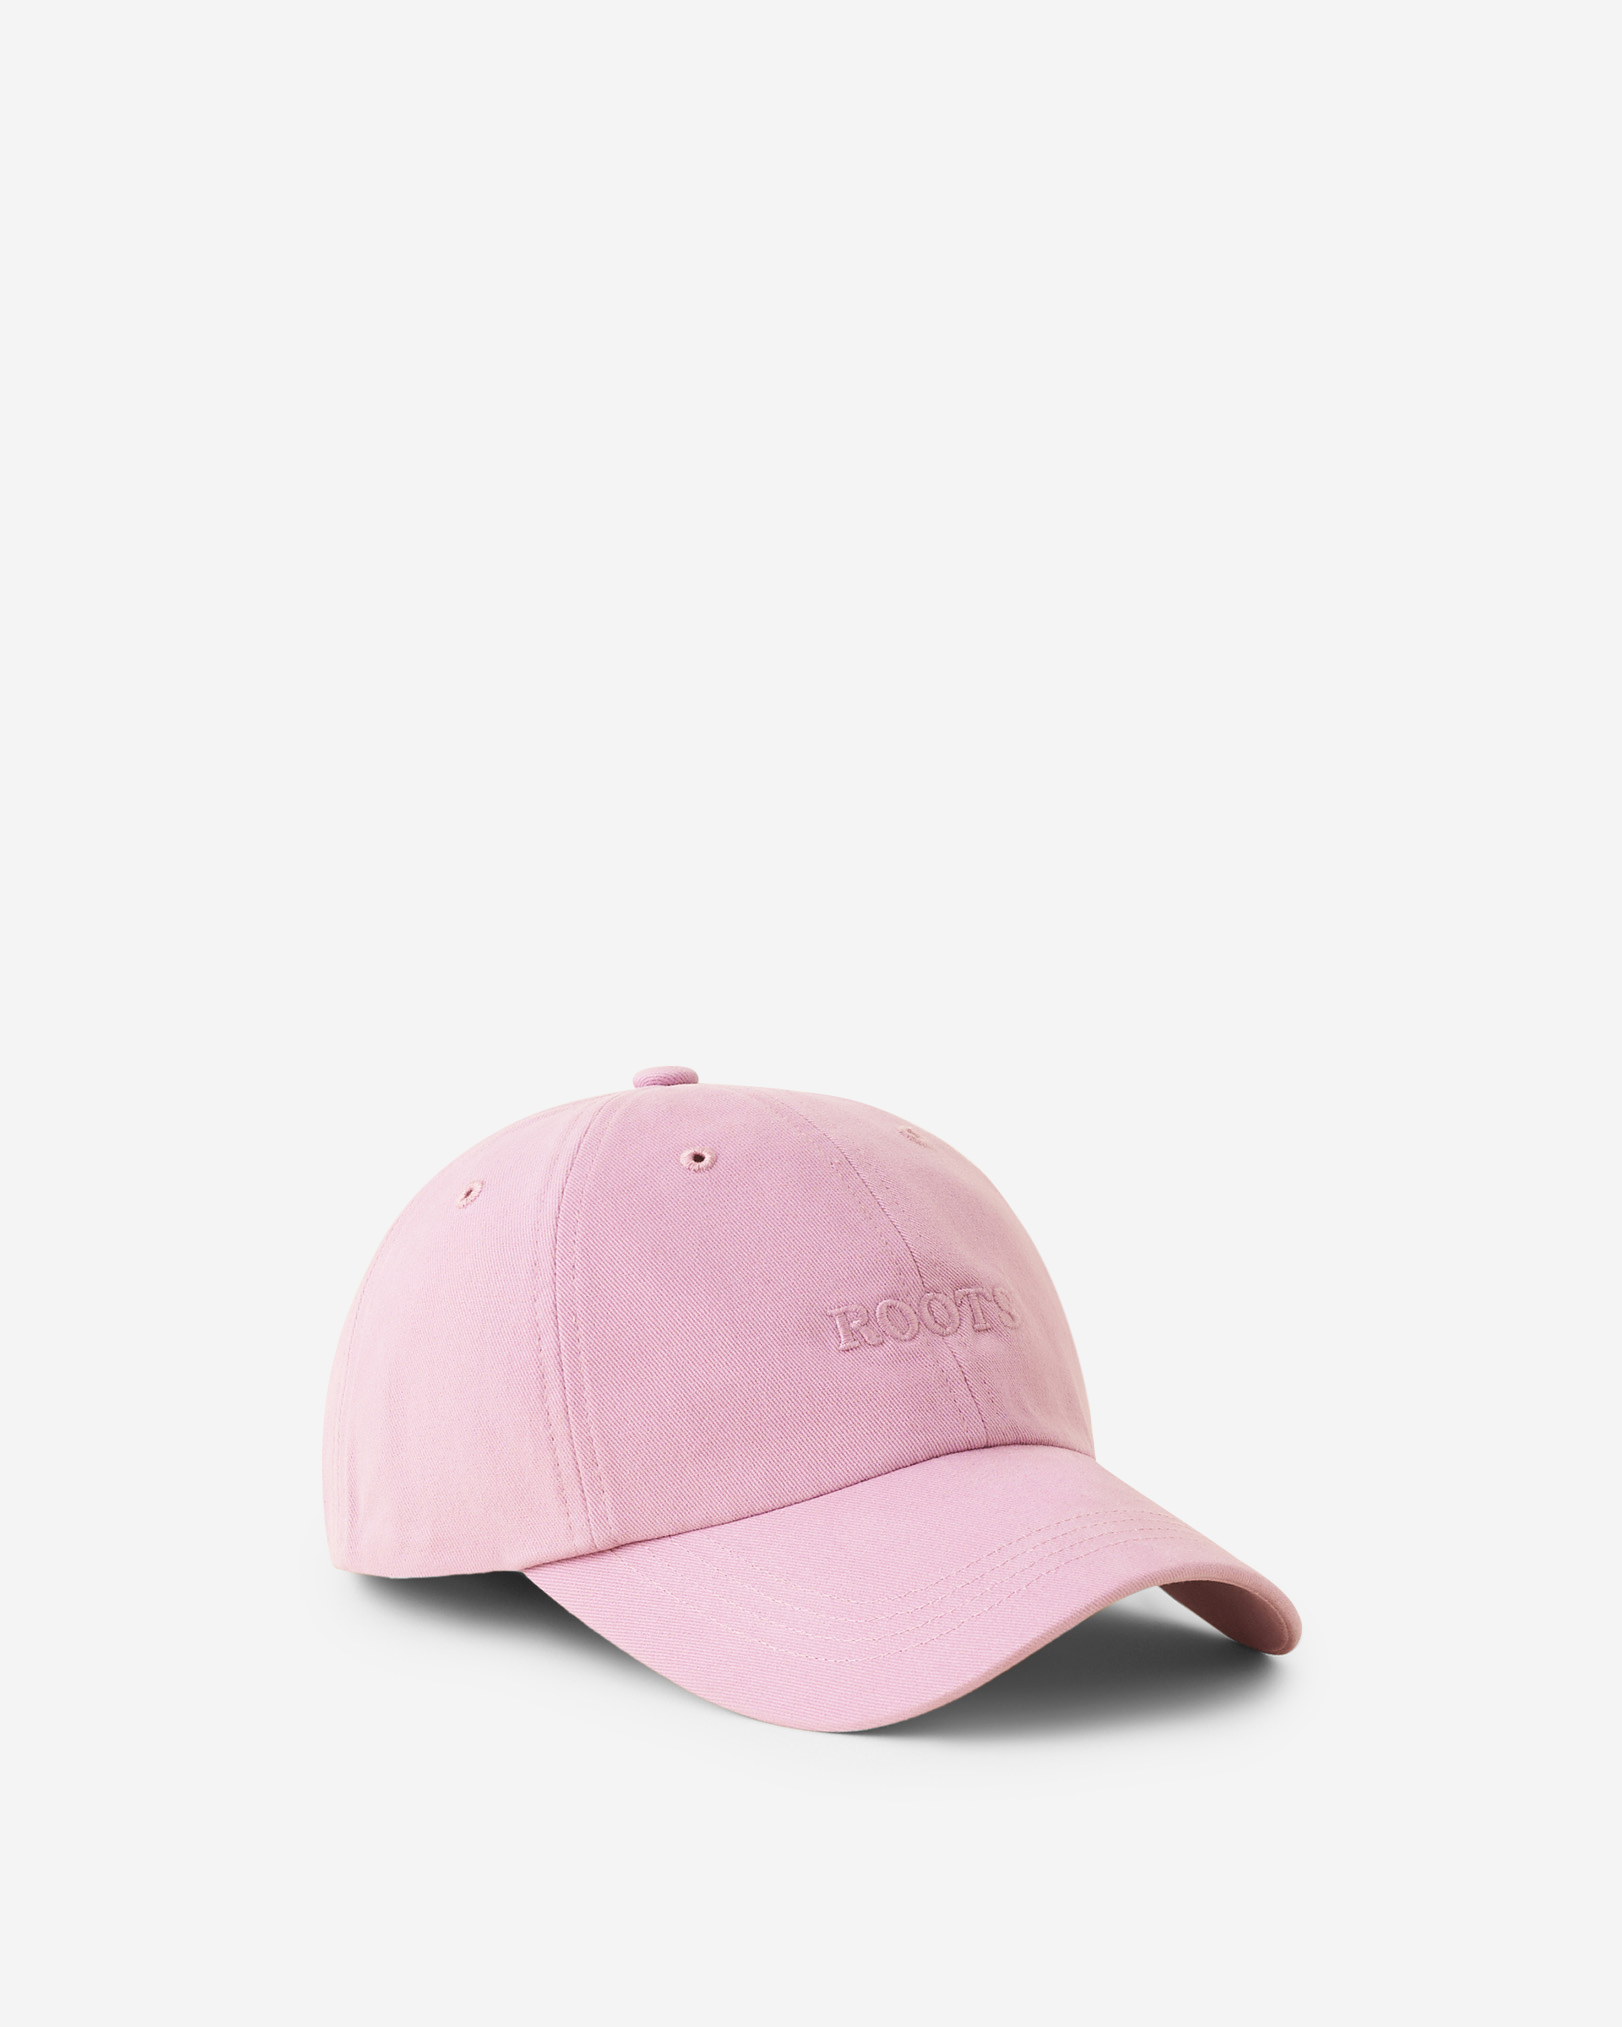 Roots Baseball Cap Hat in Orchid Haze